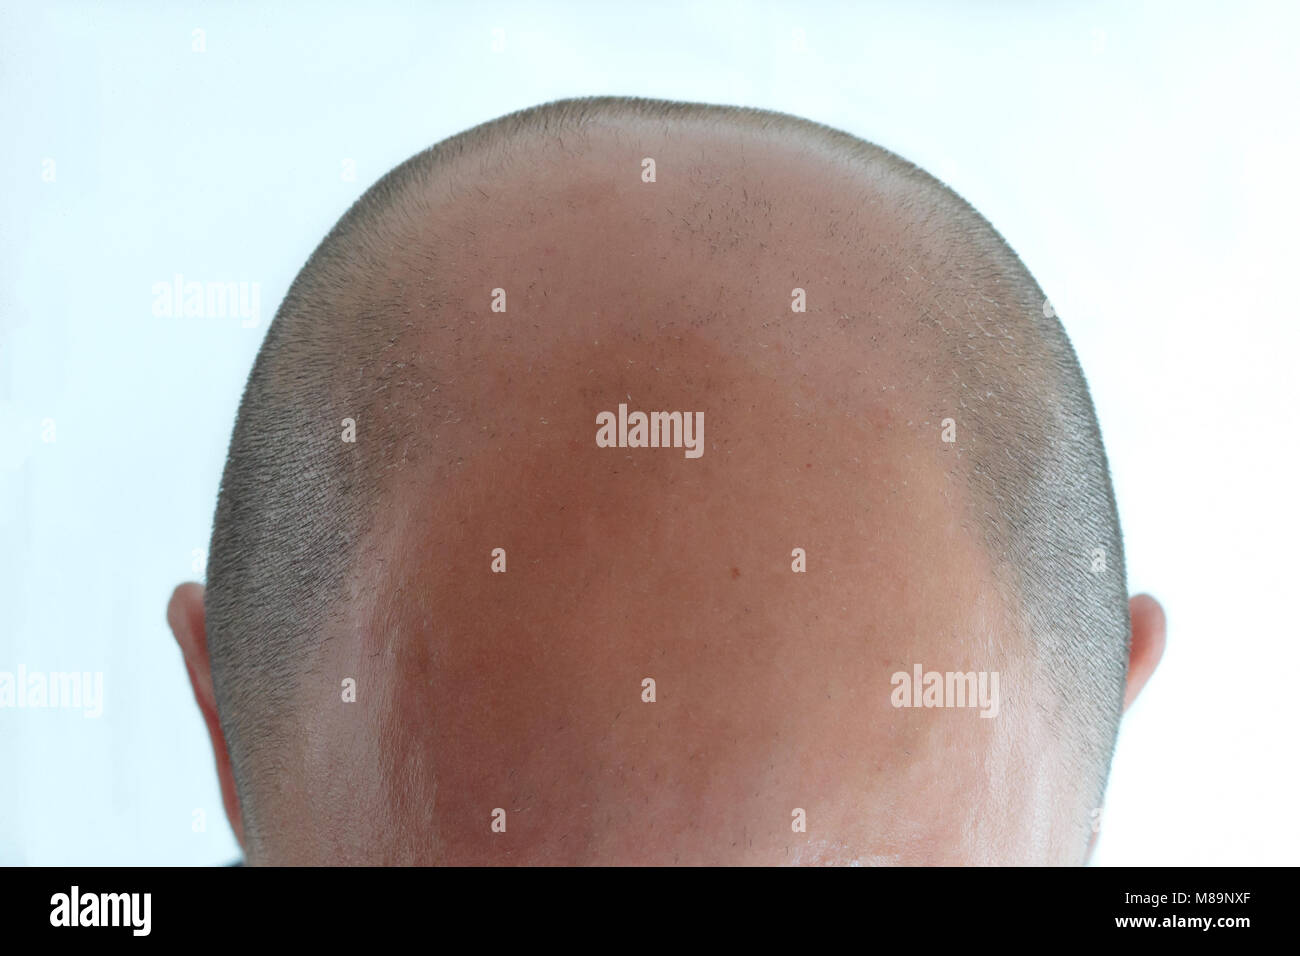 View of bald man's head with hair loss Stock Photo